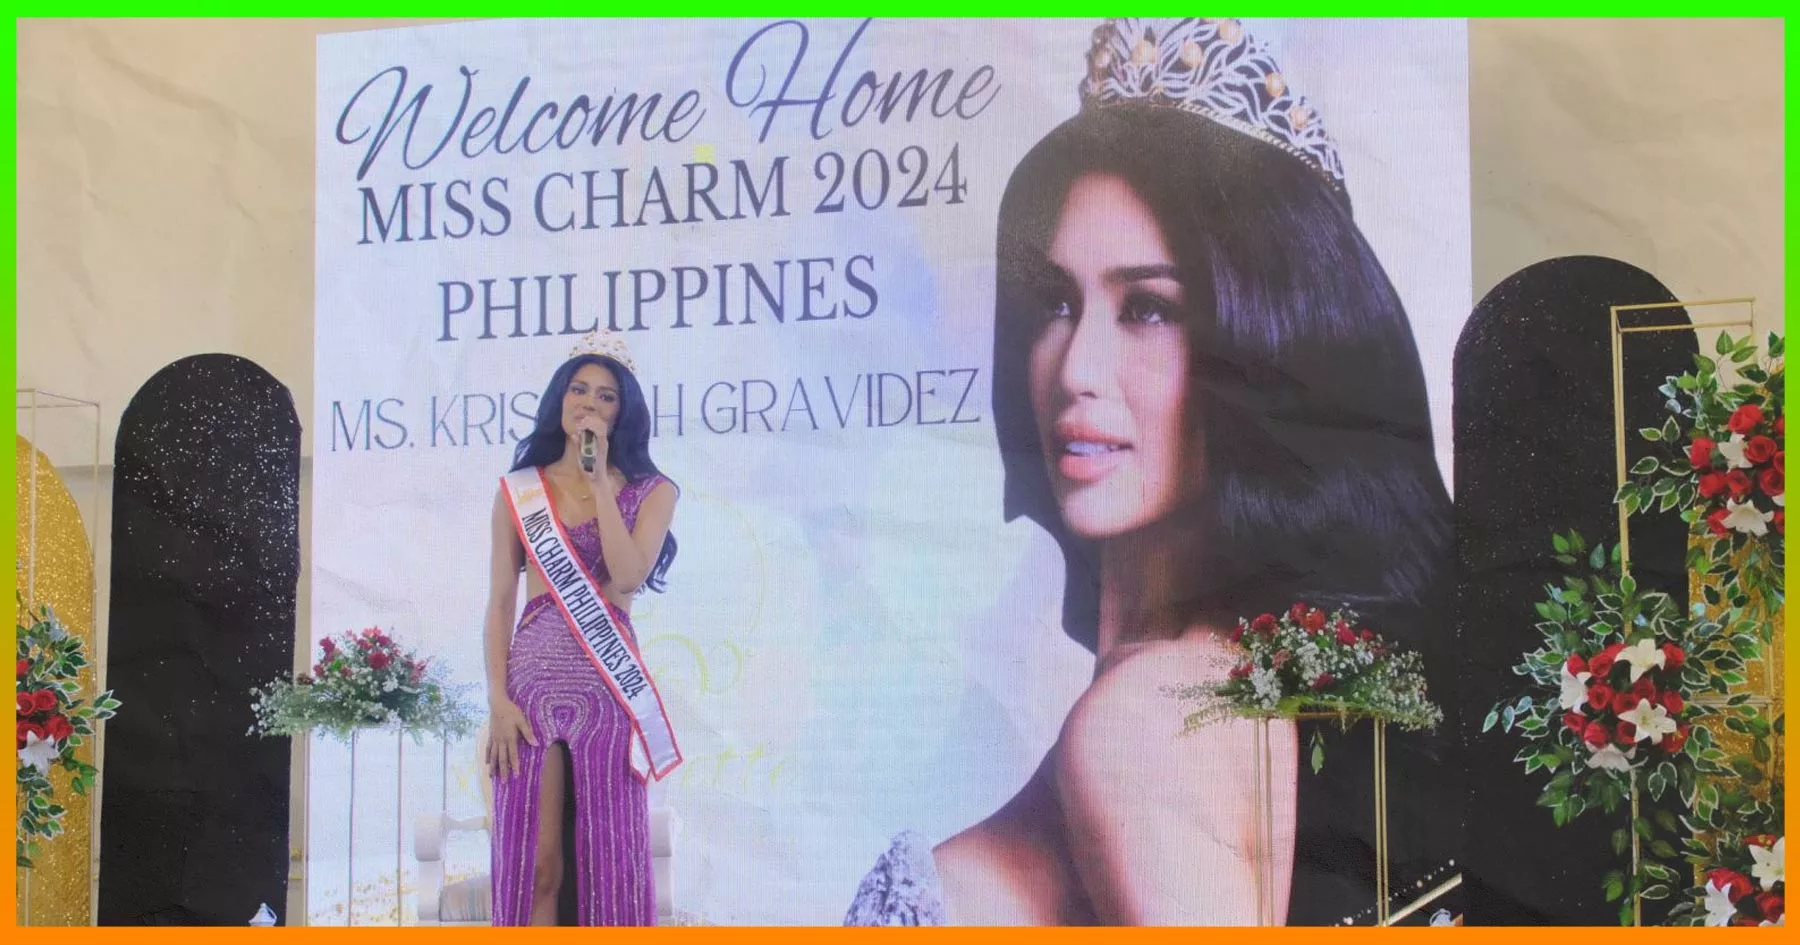 Baguio girl recognized for winning Miss Charm 2024